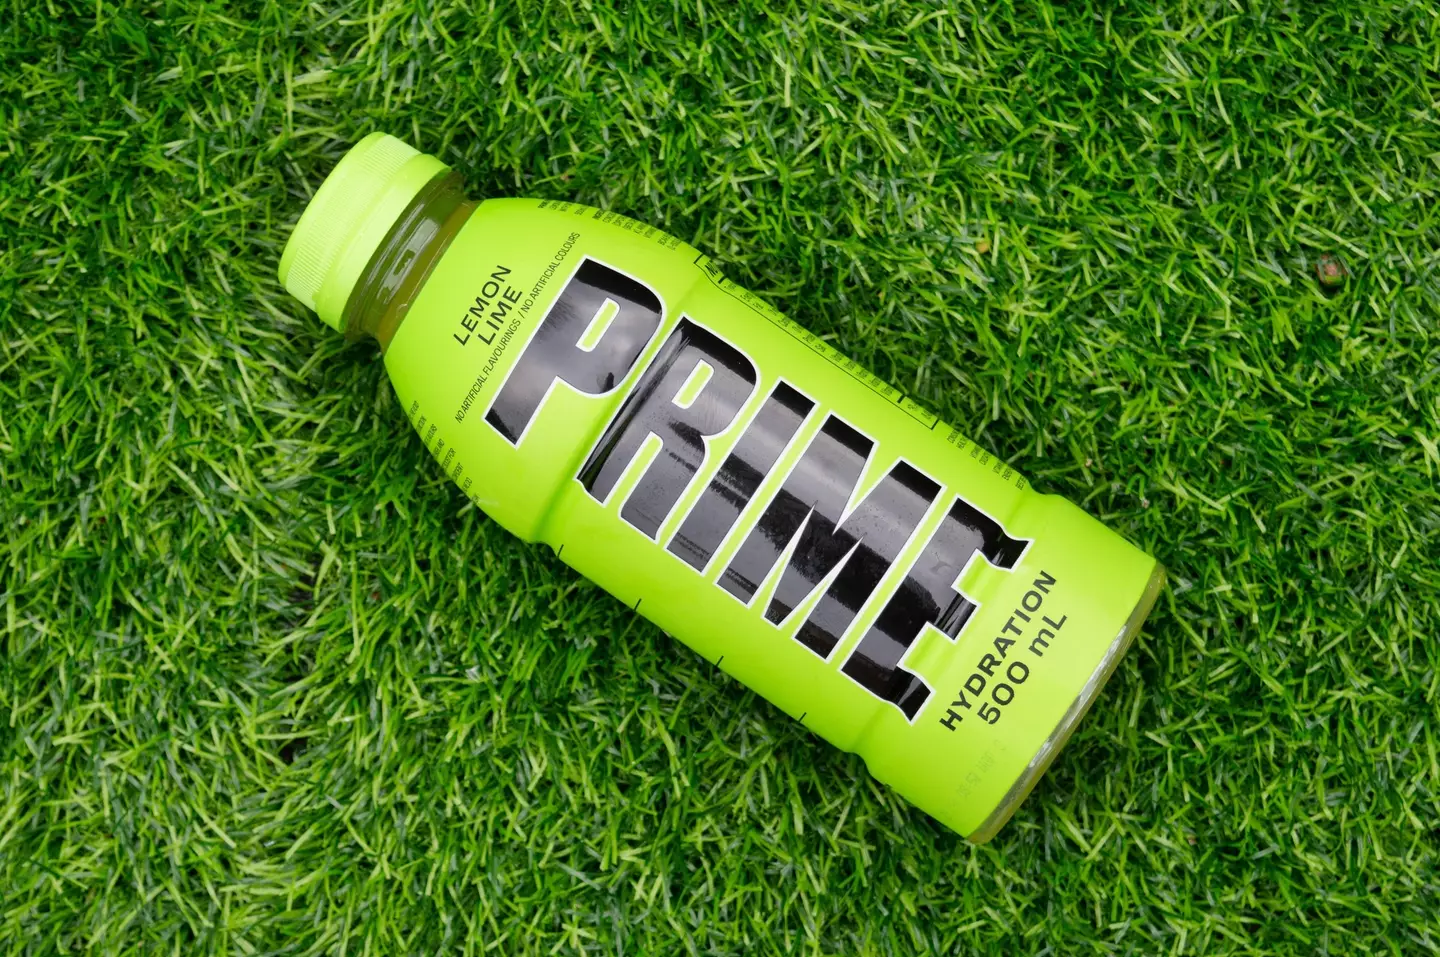 Wakey Wines has become famous for selling bottles of Prime energy drink.